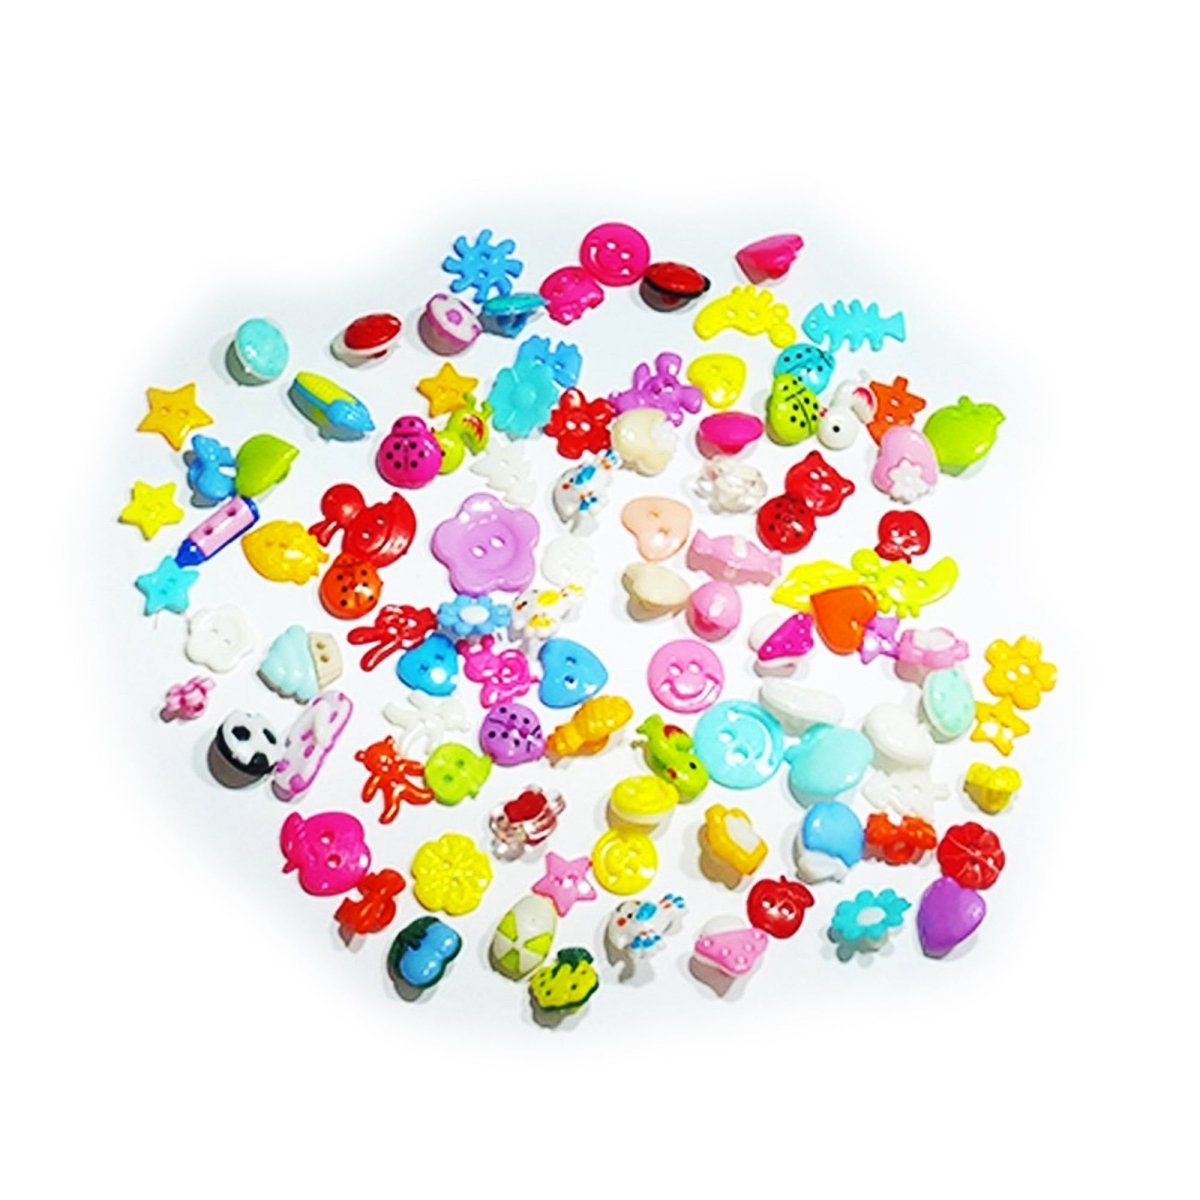 50/100pcs Mixed Shapes Buttons and Brooches for Kids Clothing Plastic Colourful Sewing - 80-100pcs Set A - - Asia Sell